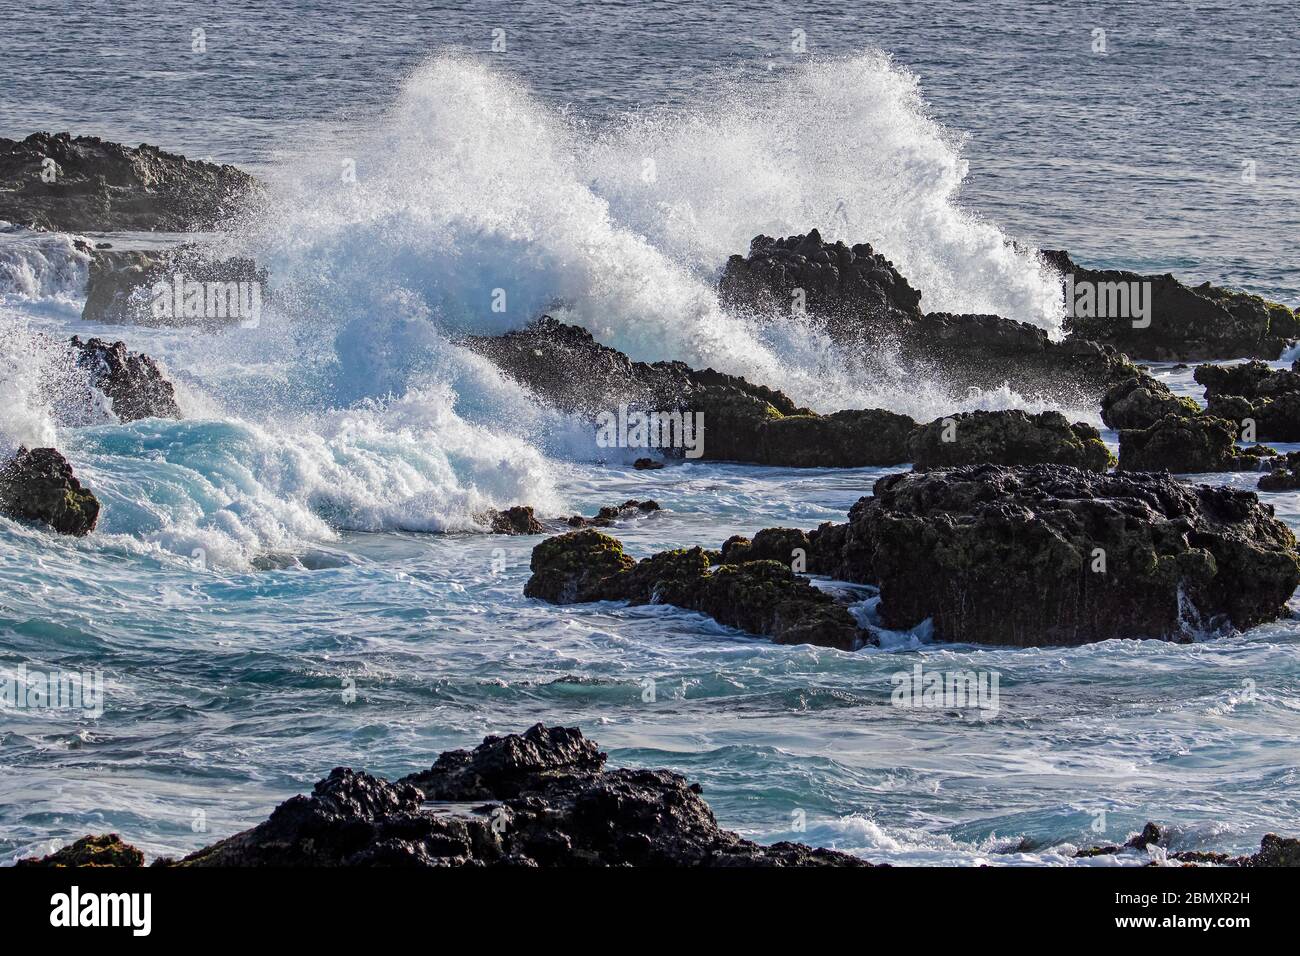 Waves breaking on volcanic rocks in the surf at the headland Ponta Temerosa on the island Santiago, Cape Verde / Cabo Verde Stock Photo